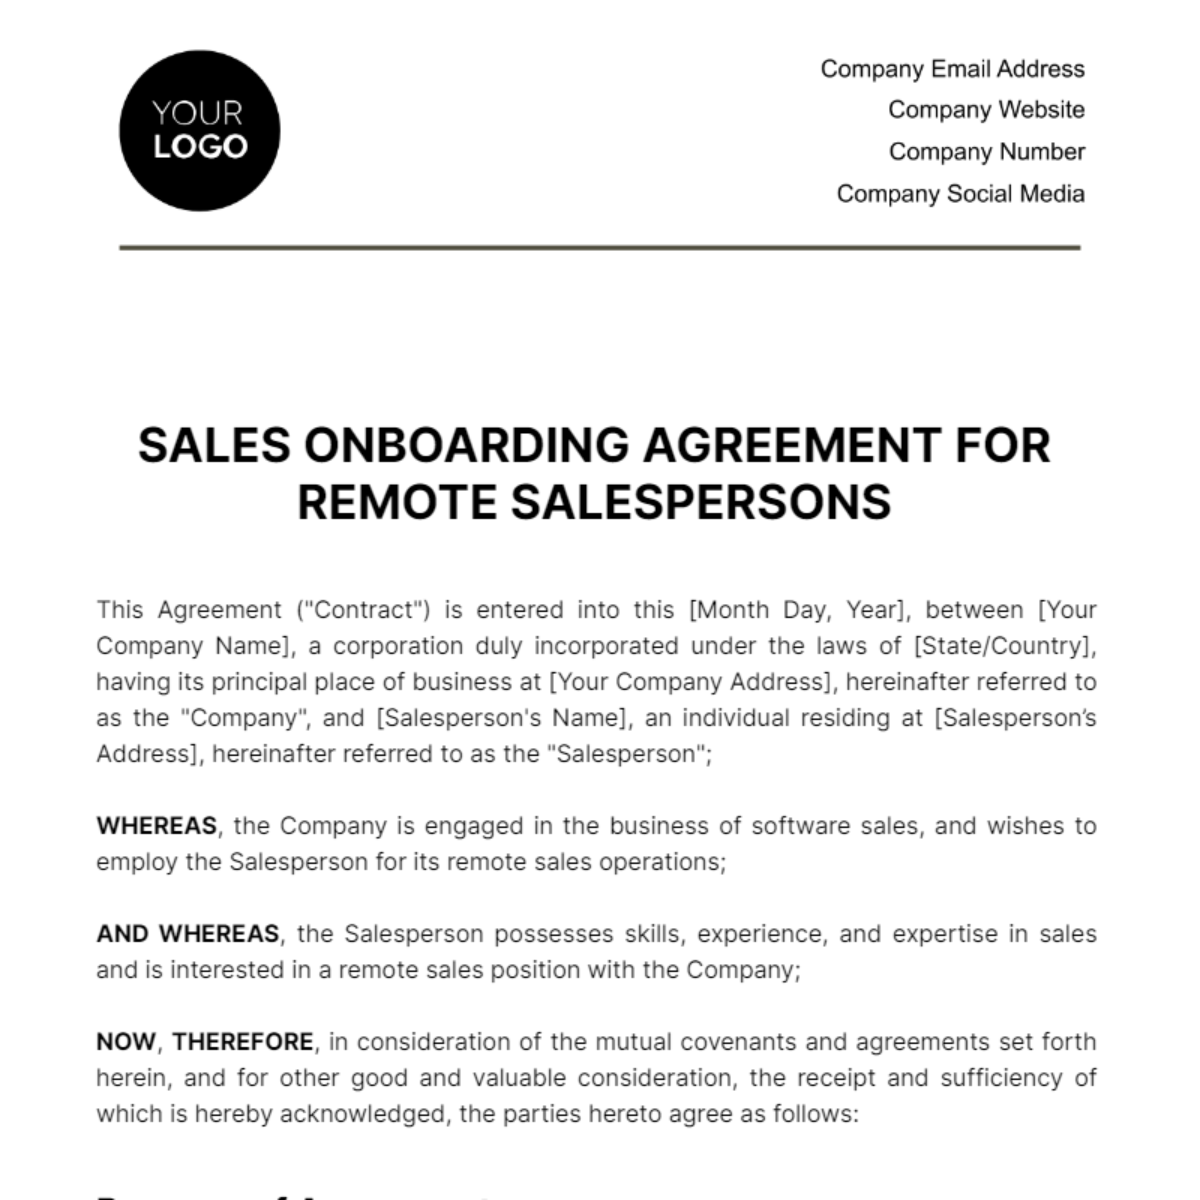 Sales Onboarding Agreement for Remote Salespersons Template